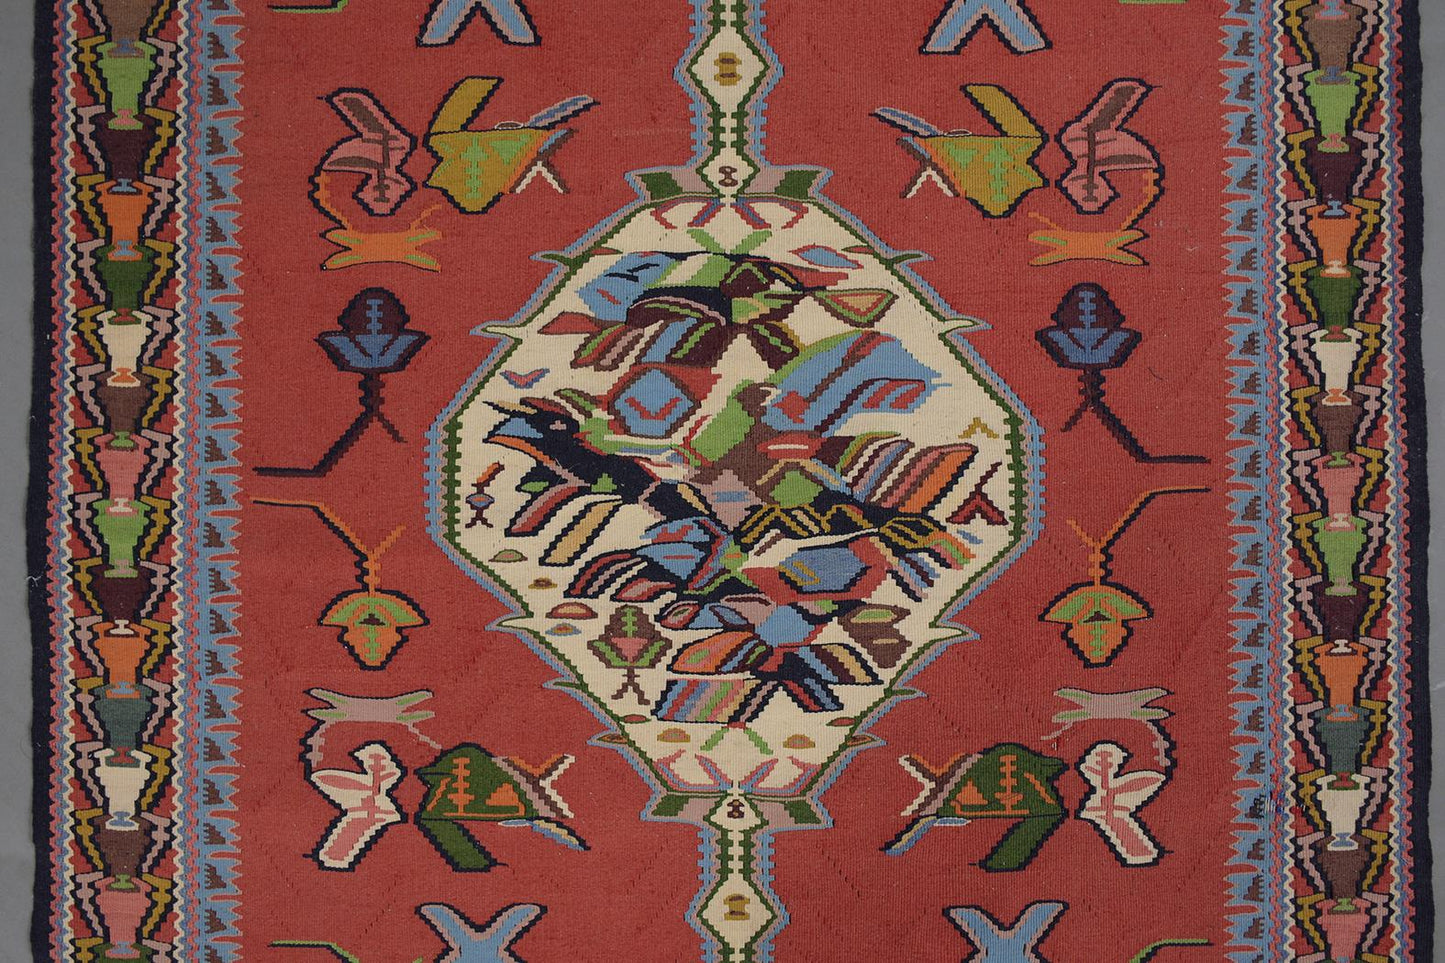 Antique Circa 1900 Handwoven Navajo Transitional Rug with Traditional Cross-Shape Pattern